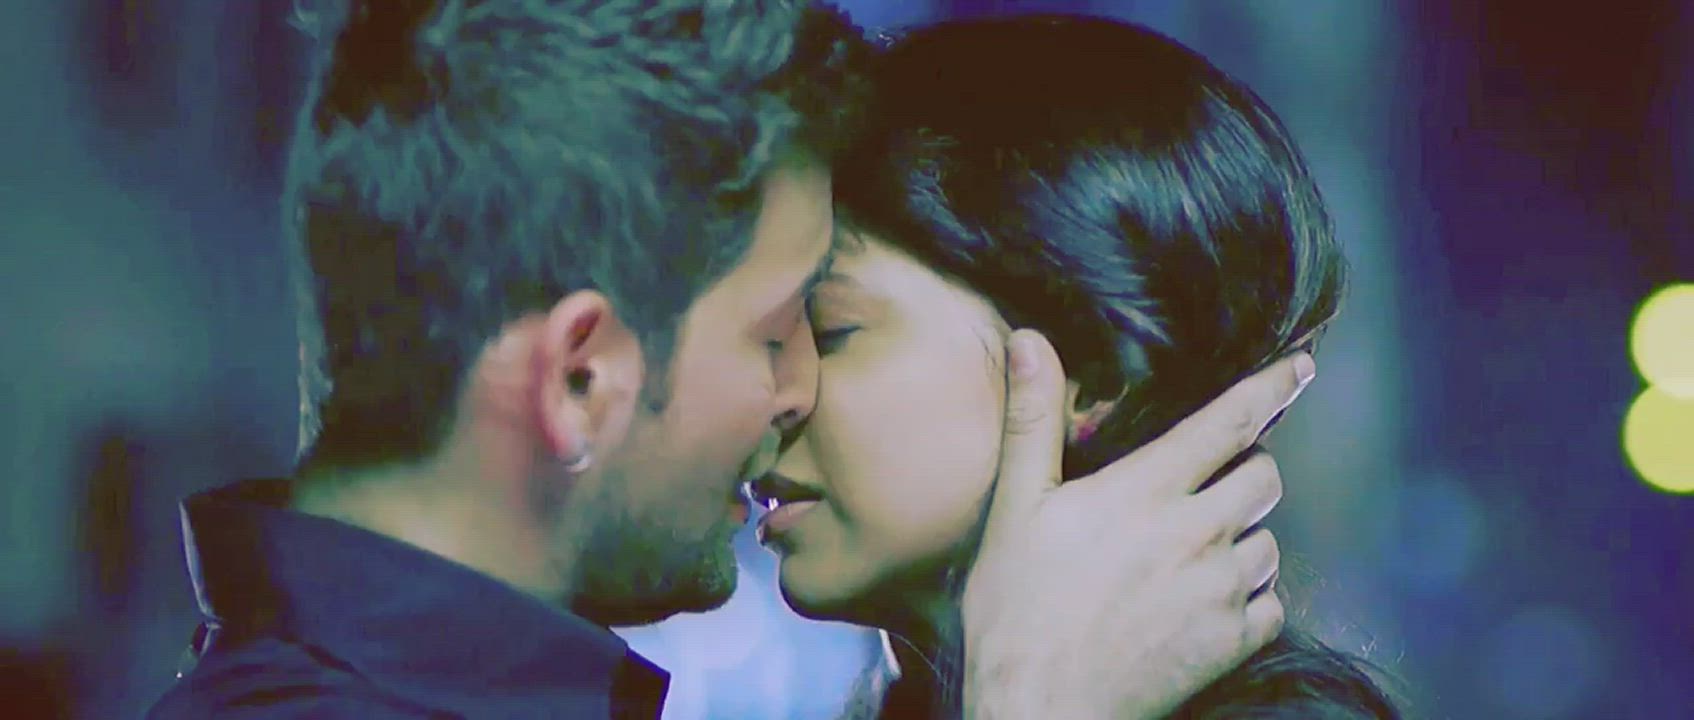 Asian Babe Bollywood Celebrity Indian Kiss Kissing clip